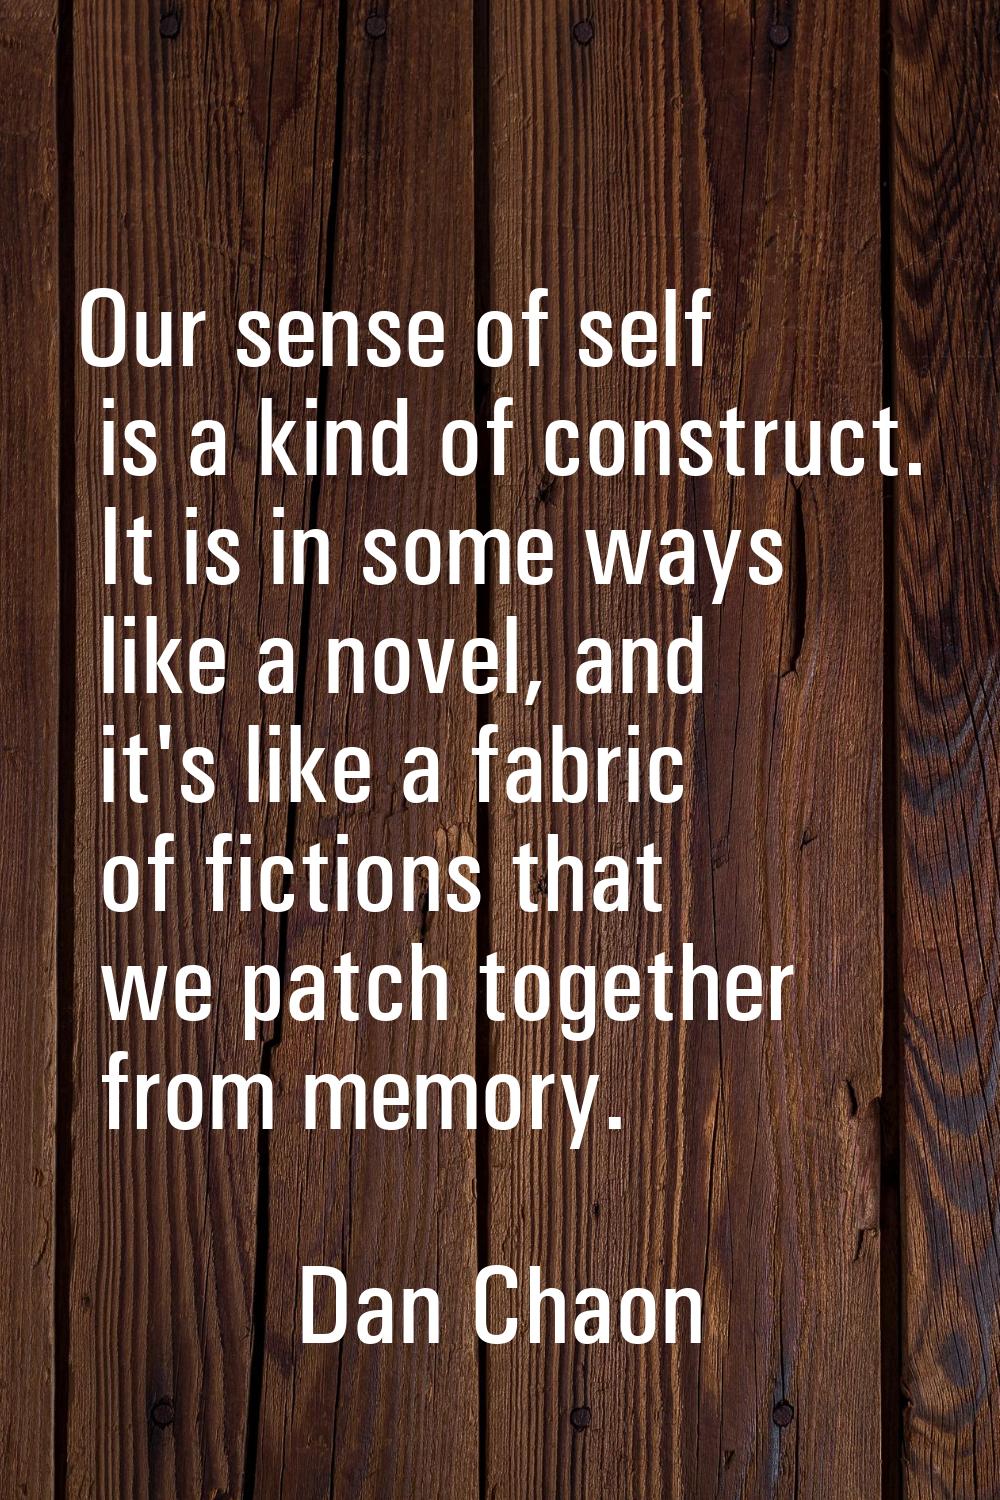 Our sense of self is a kind of construct. It is in some ways like a novel, and it's like a fabric o